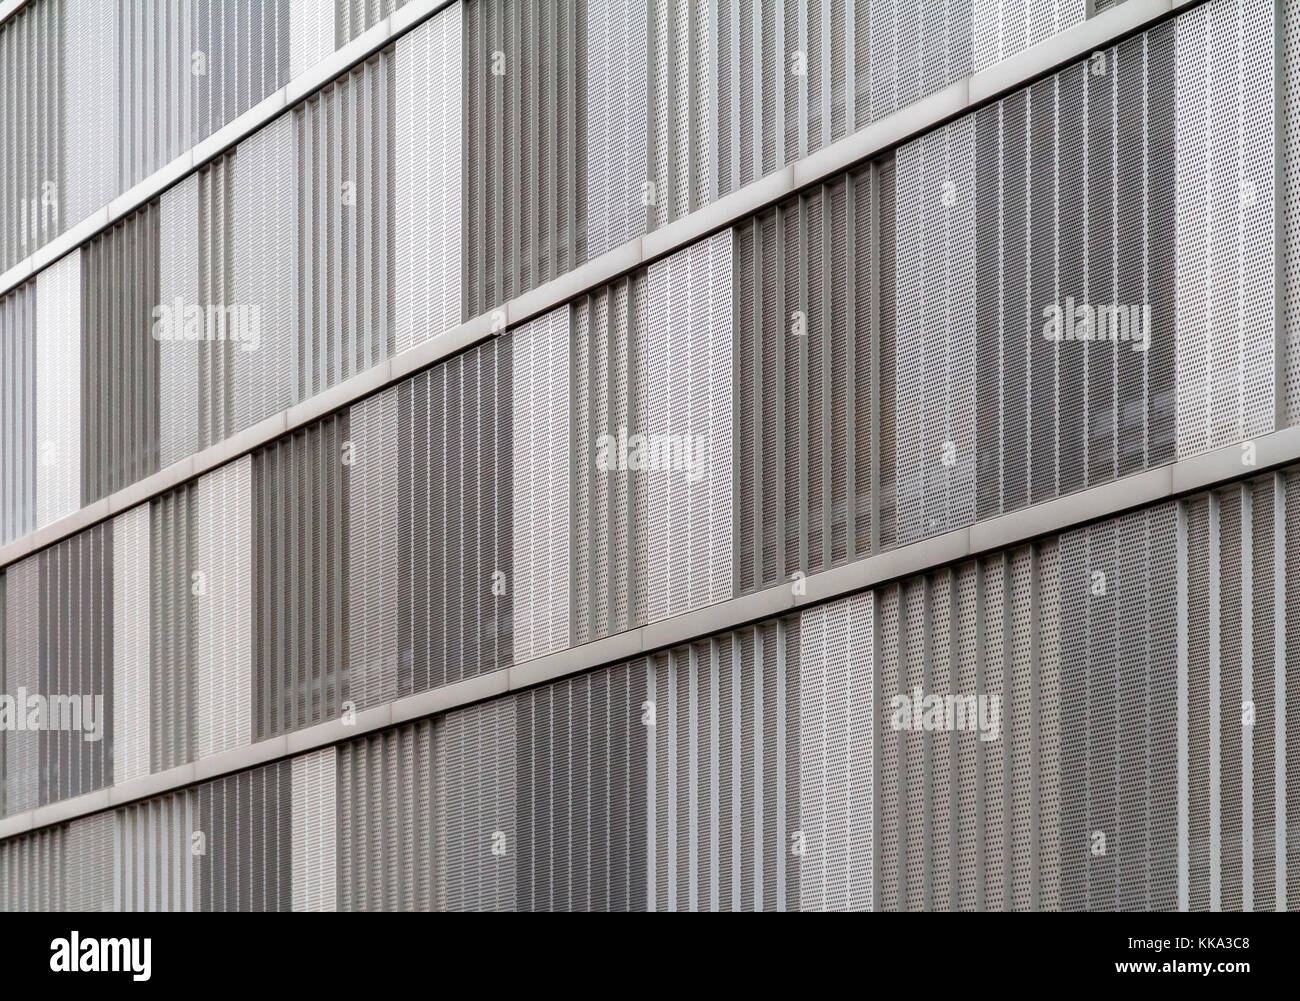 full frame detail of a house facade cased with metallic perforated plates Stock Photo